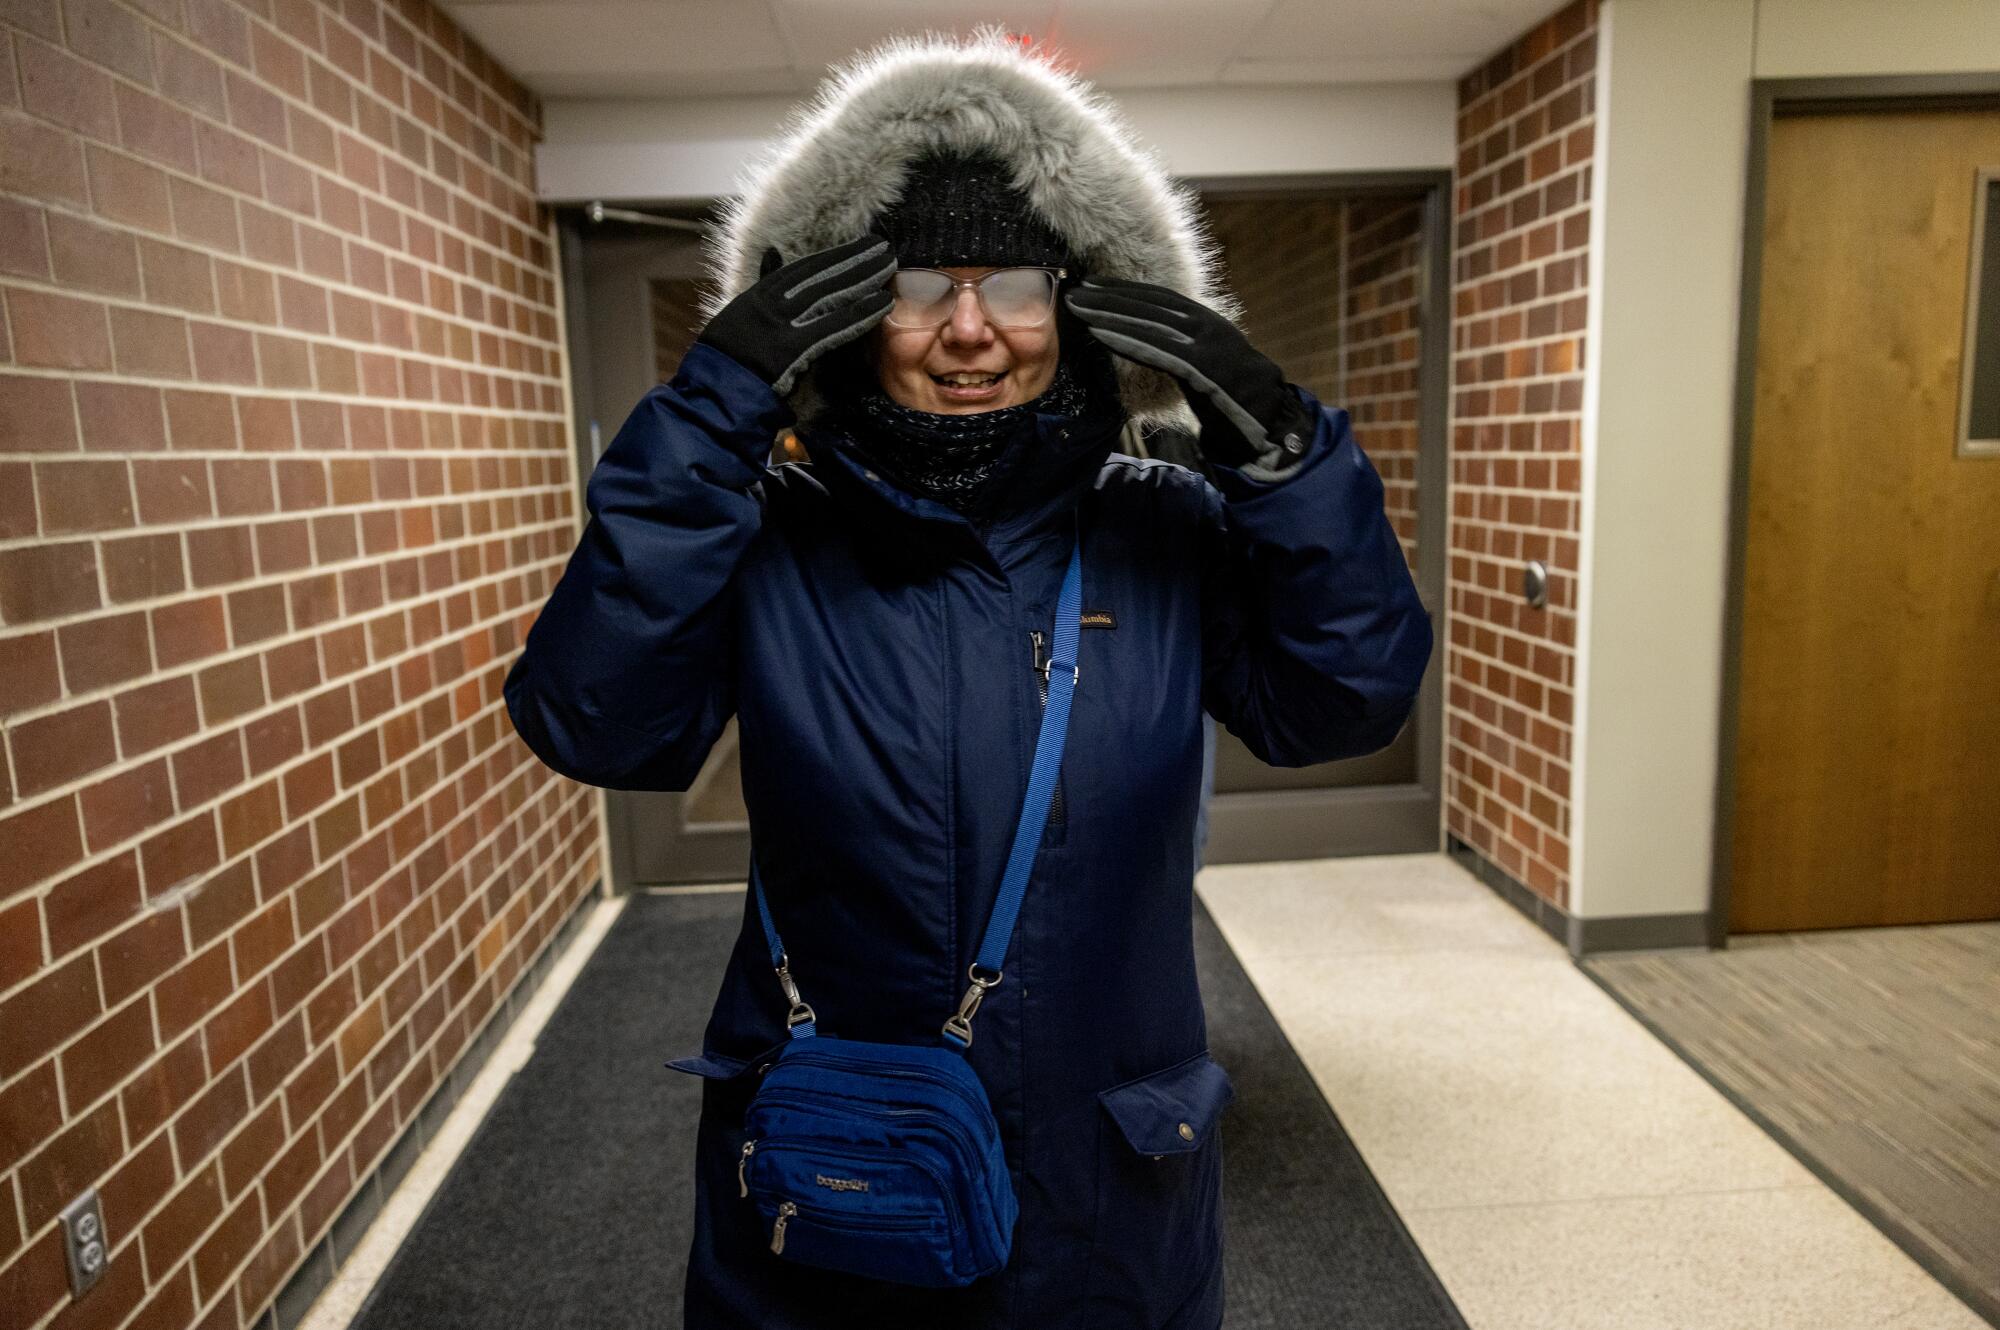 Natalia Porter of Huntington Beach glasses are fogged up after walking in sub-zero temperatures in Ames, Iowa.